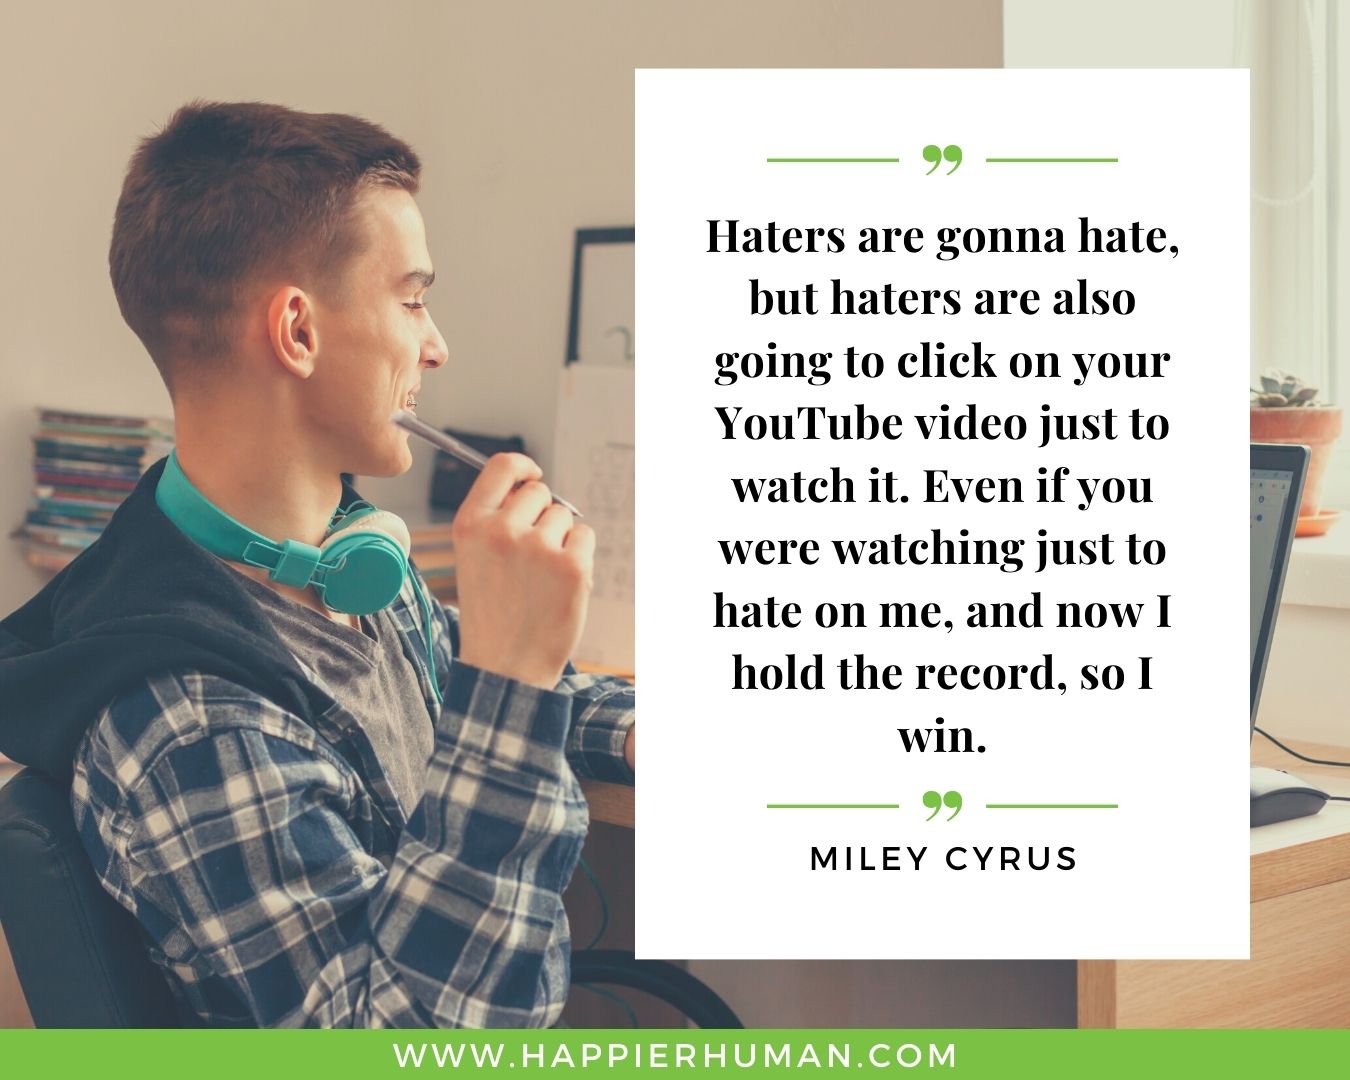 Haters Quotes - “Haters are gonna hate, but haters are also going to click on your YouTube video just to watch it. Even if you were watching just to hate on me, and now I hold the record, so I win.” - Miley Cyrus